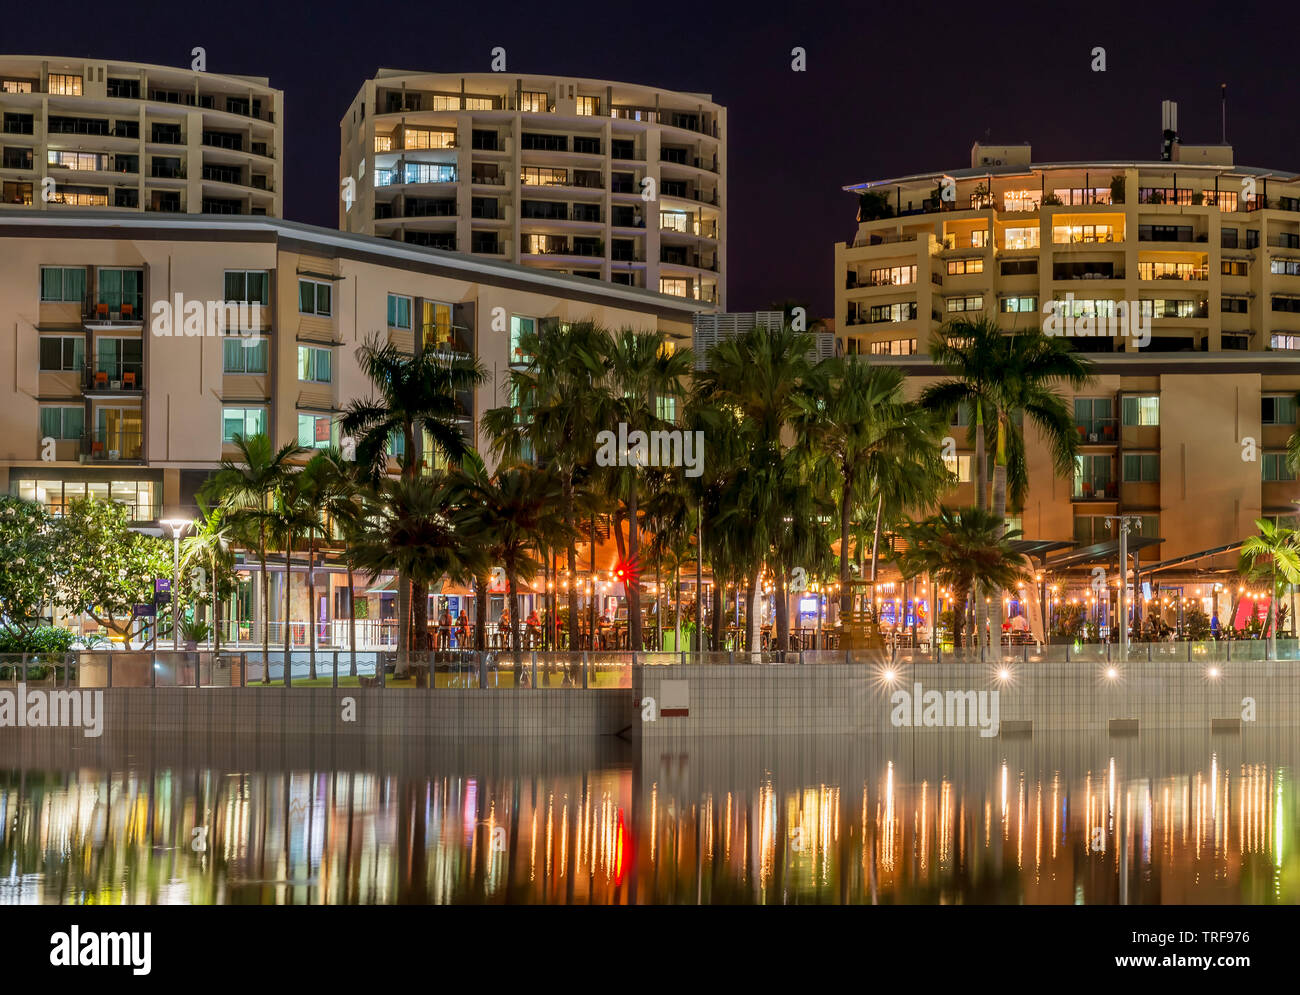 The beautiful Waterfront of Darwin, Australia, seen with the reflection in the water in the evening light Stock Photo